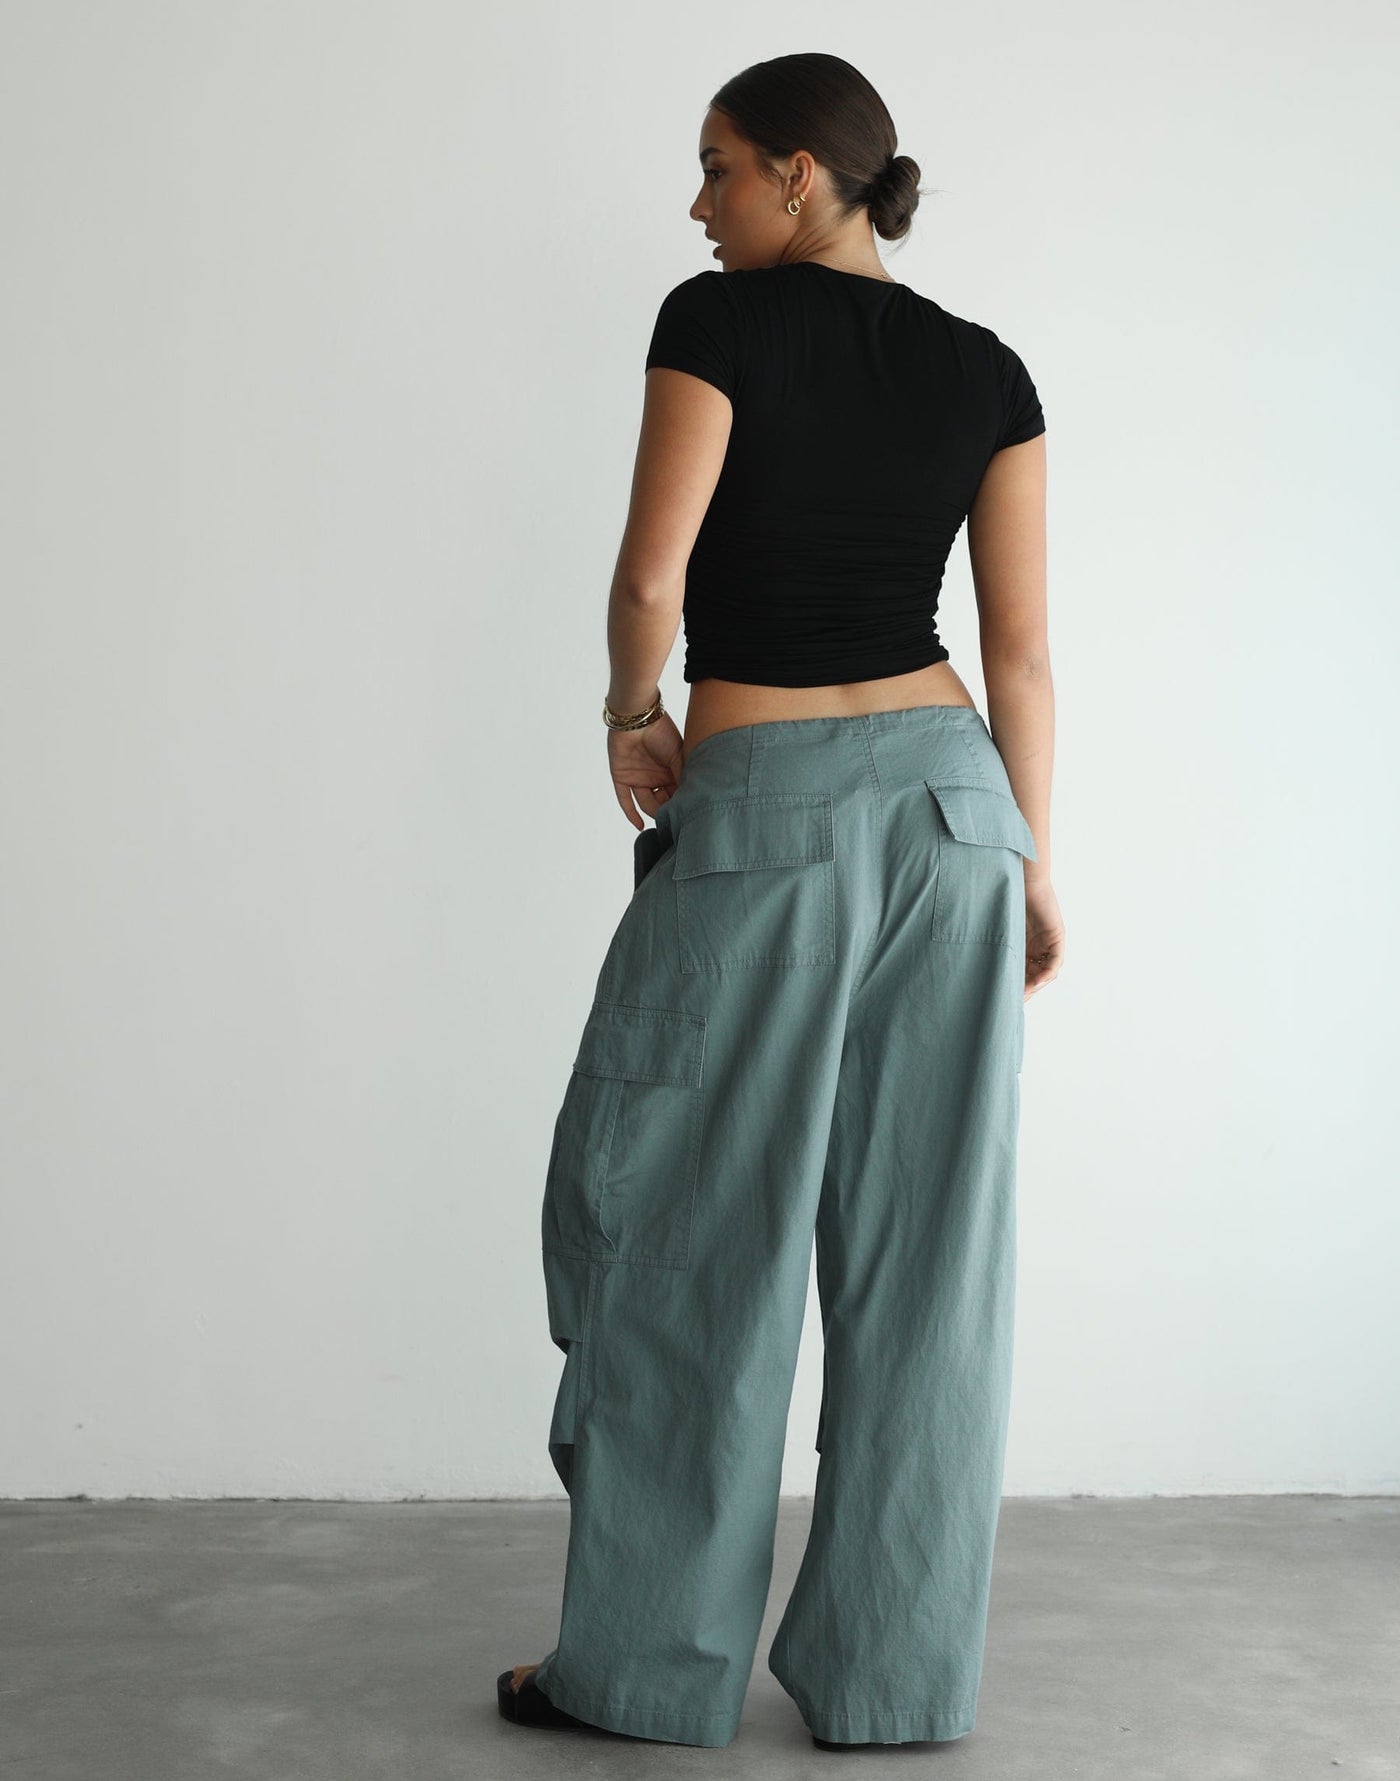 Utlity Pant (Slate) - By Lioness - Women's Pants - Charcoal Clothing